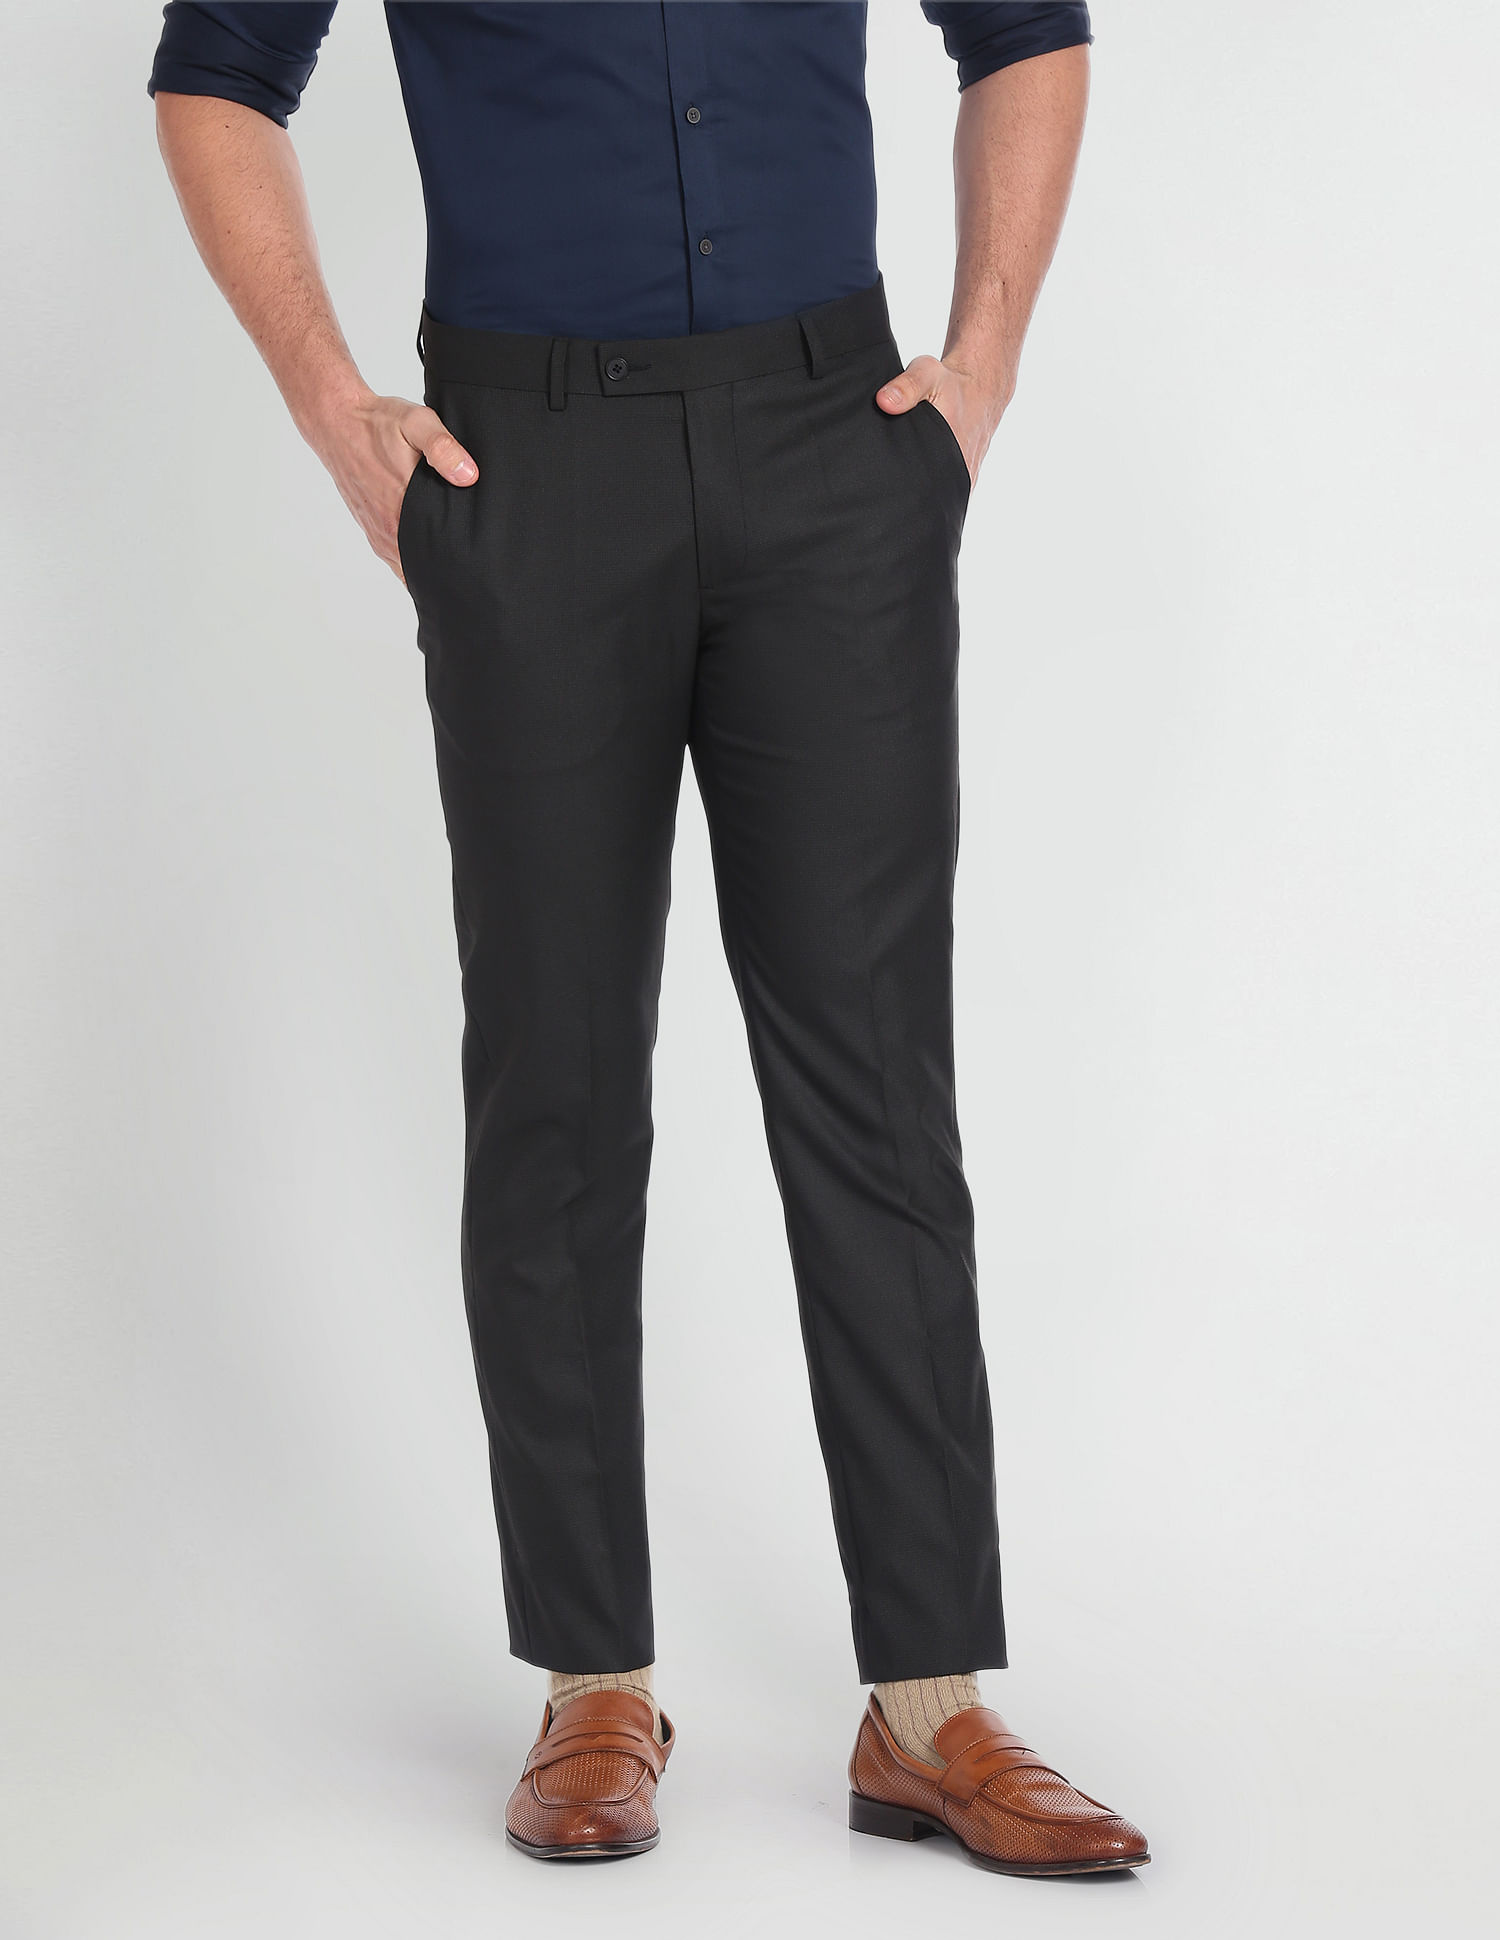 Navy Print Performance Trousers – The Helm Clothing